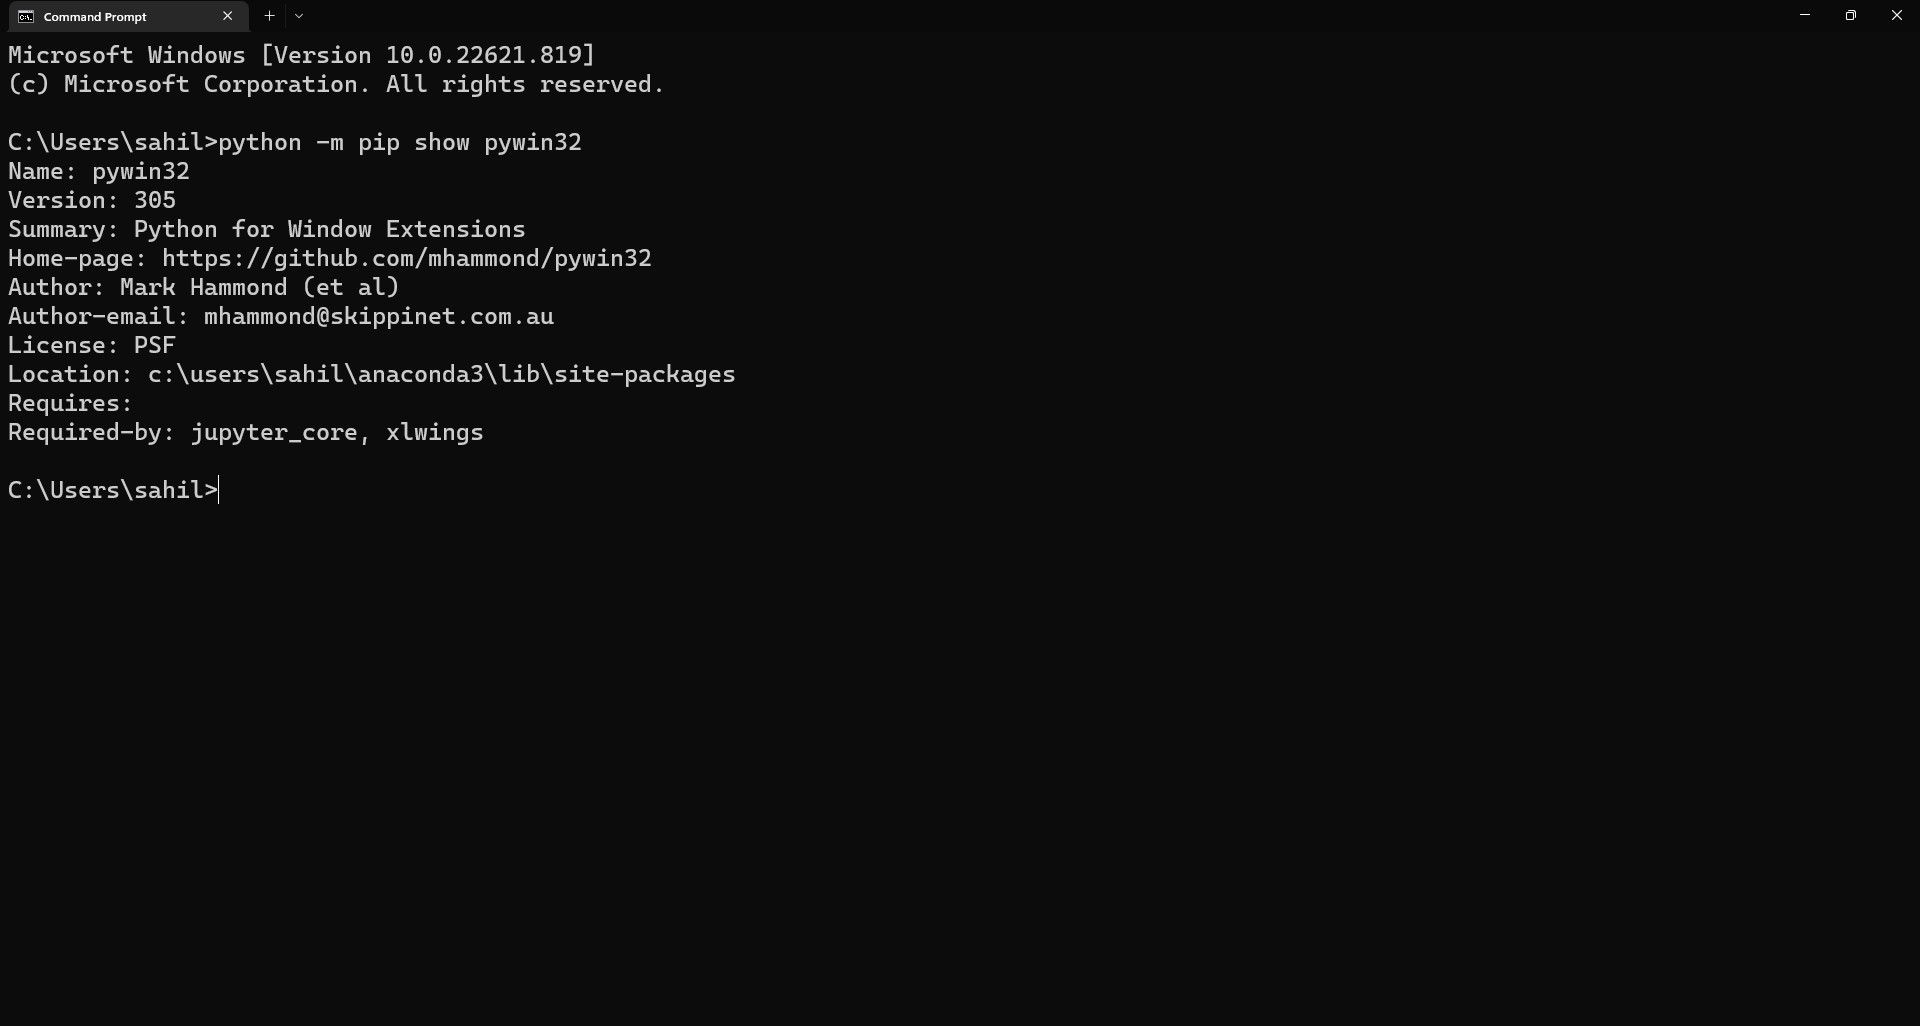 Windows command prompt with Python verification code